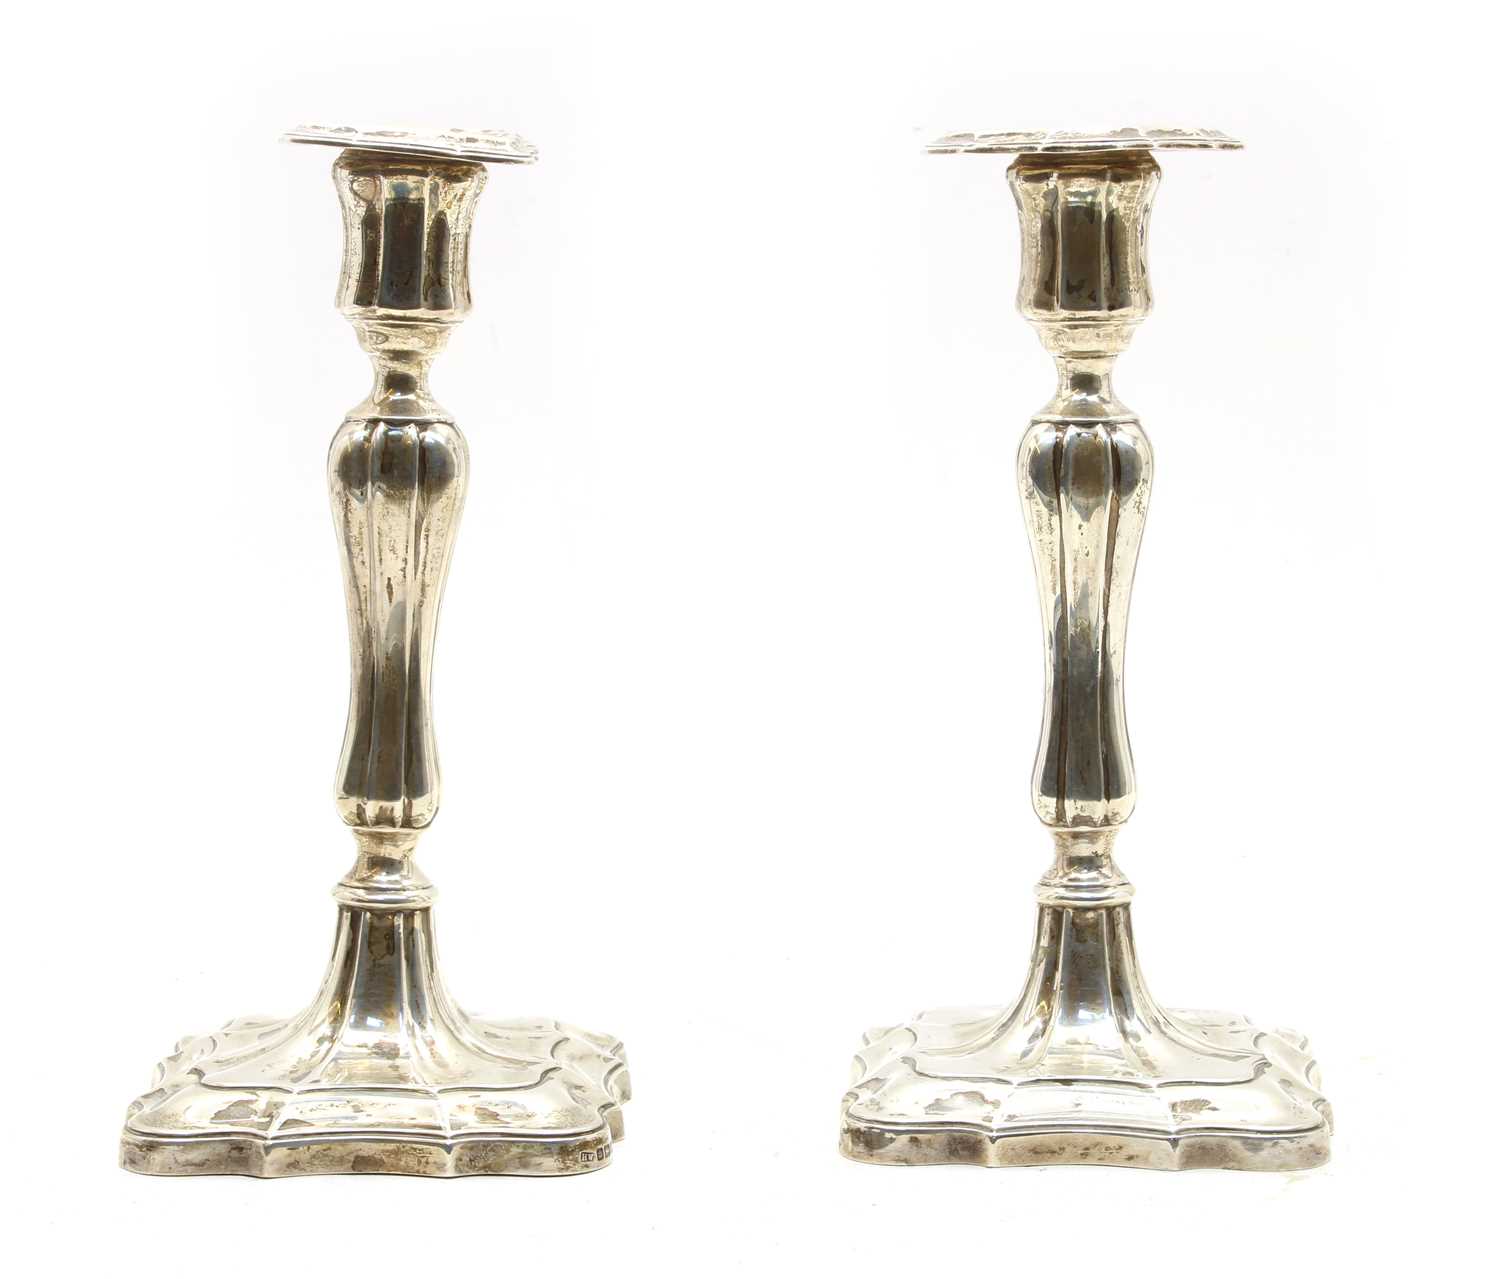 Lot 61 - A pair of  Edwardian silver candlesticks